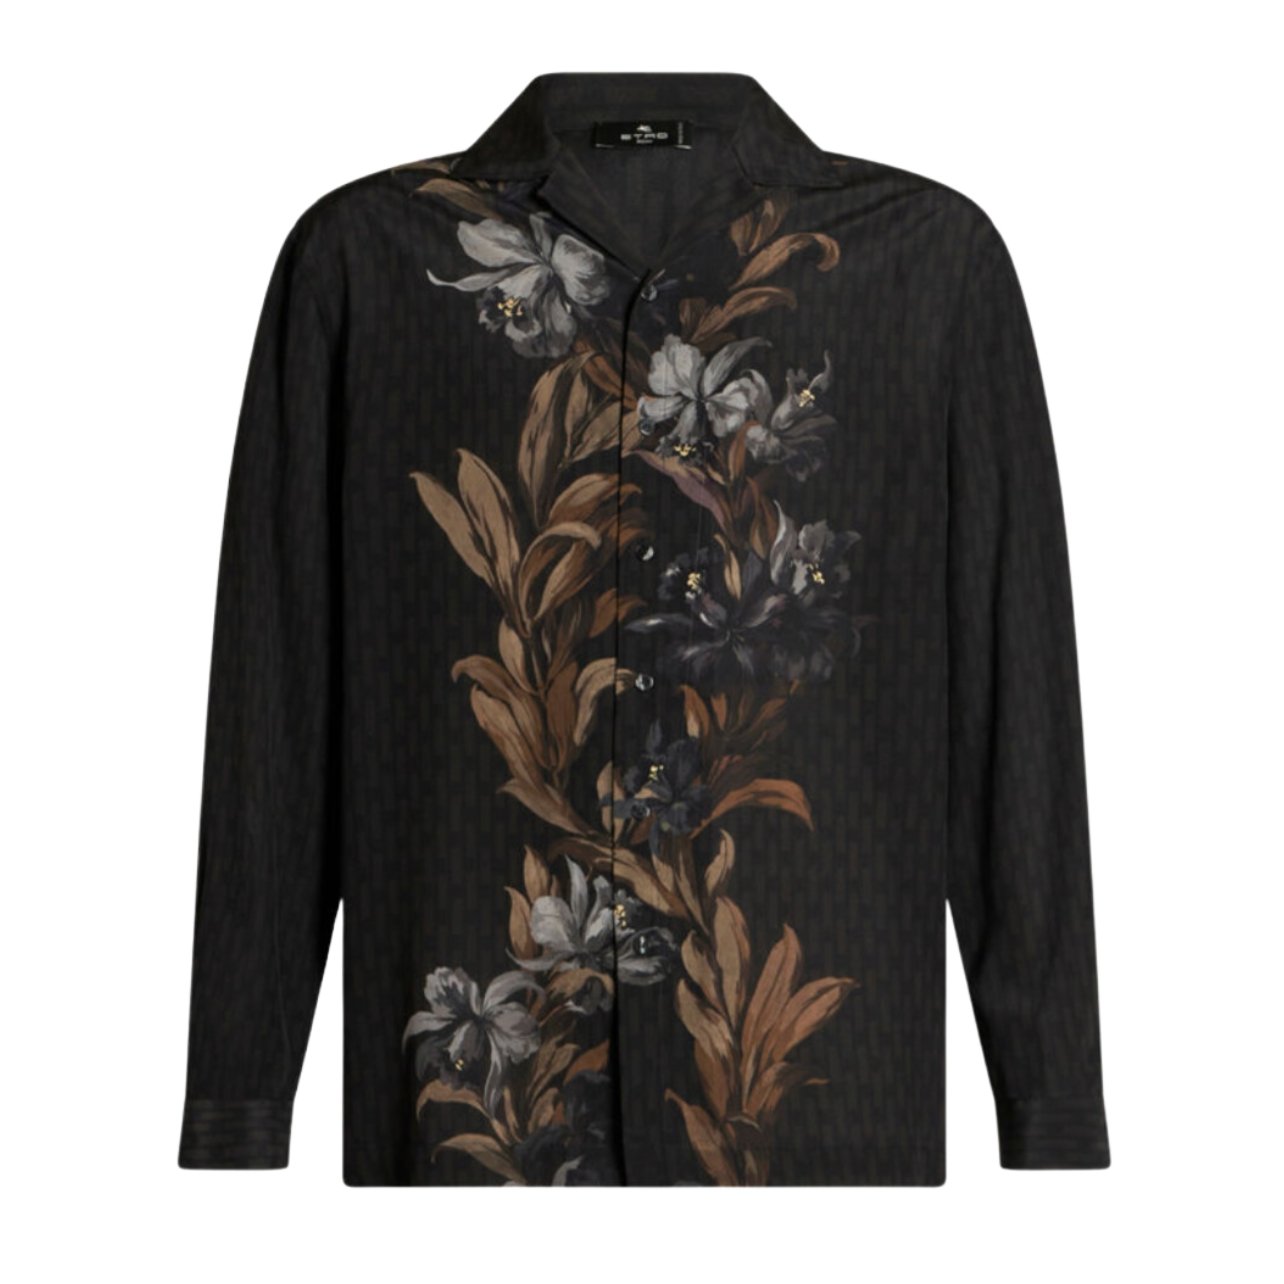 Consider this masquerade ball your gateway into more fashion-forward dressing. A flowy yet bold bowling shirt with geometric patterns like this one from Etro will look great at the party with black or jewel-toned pants and great on you later when you decide your white button-up will no longer do.